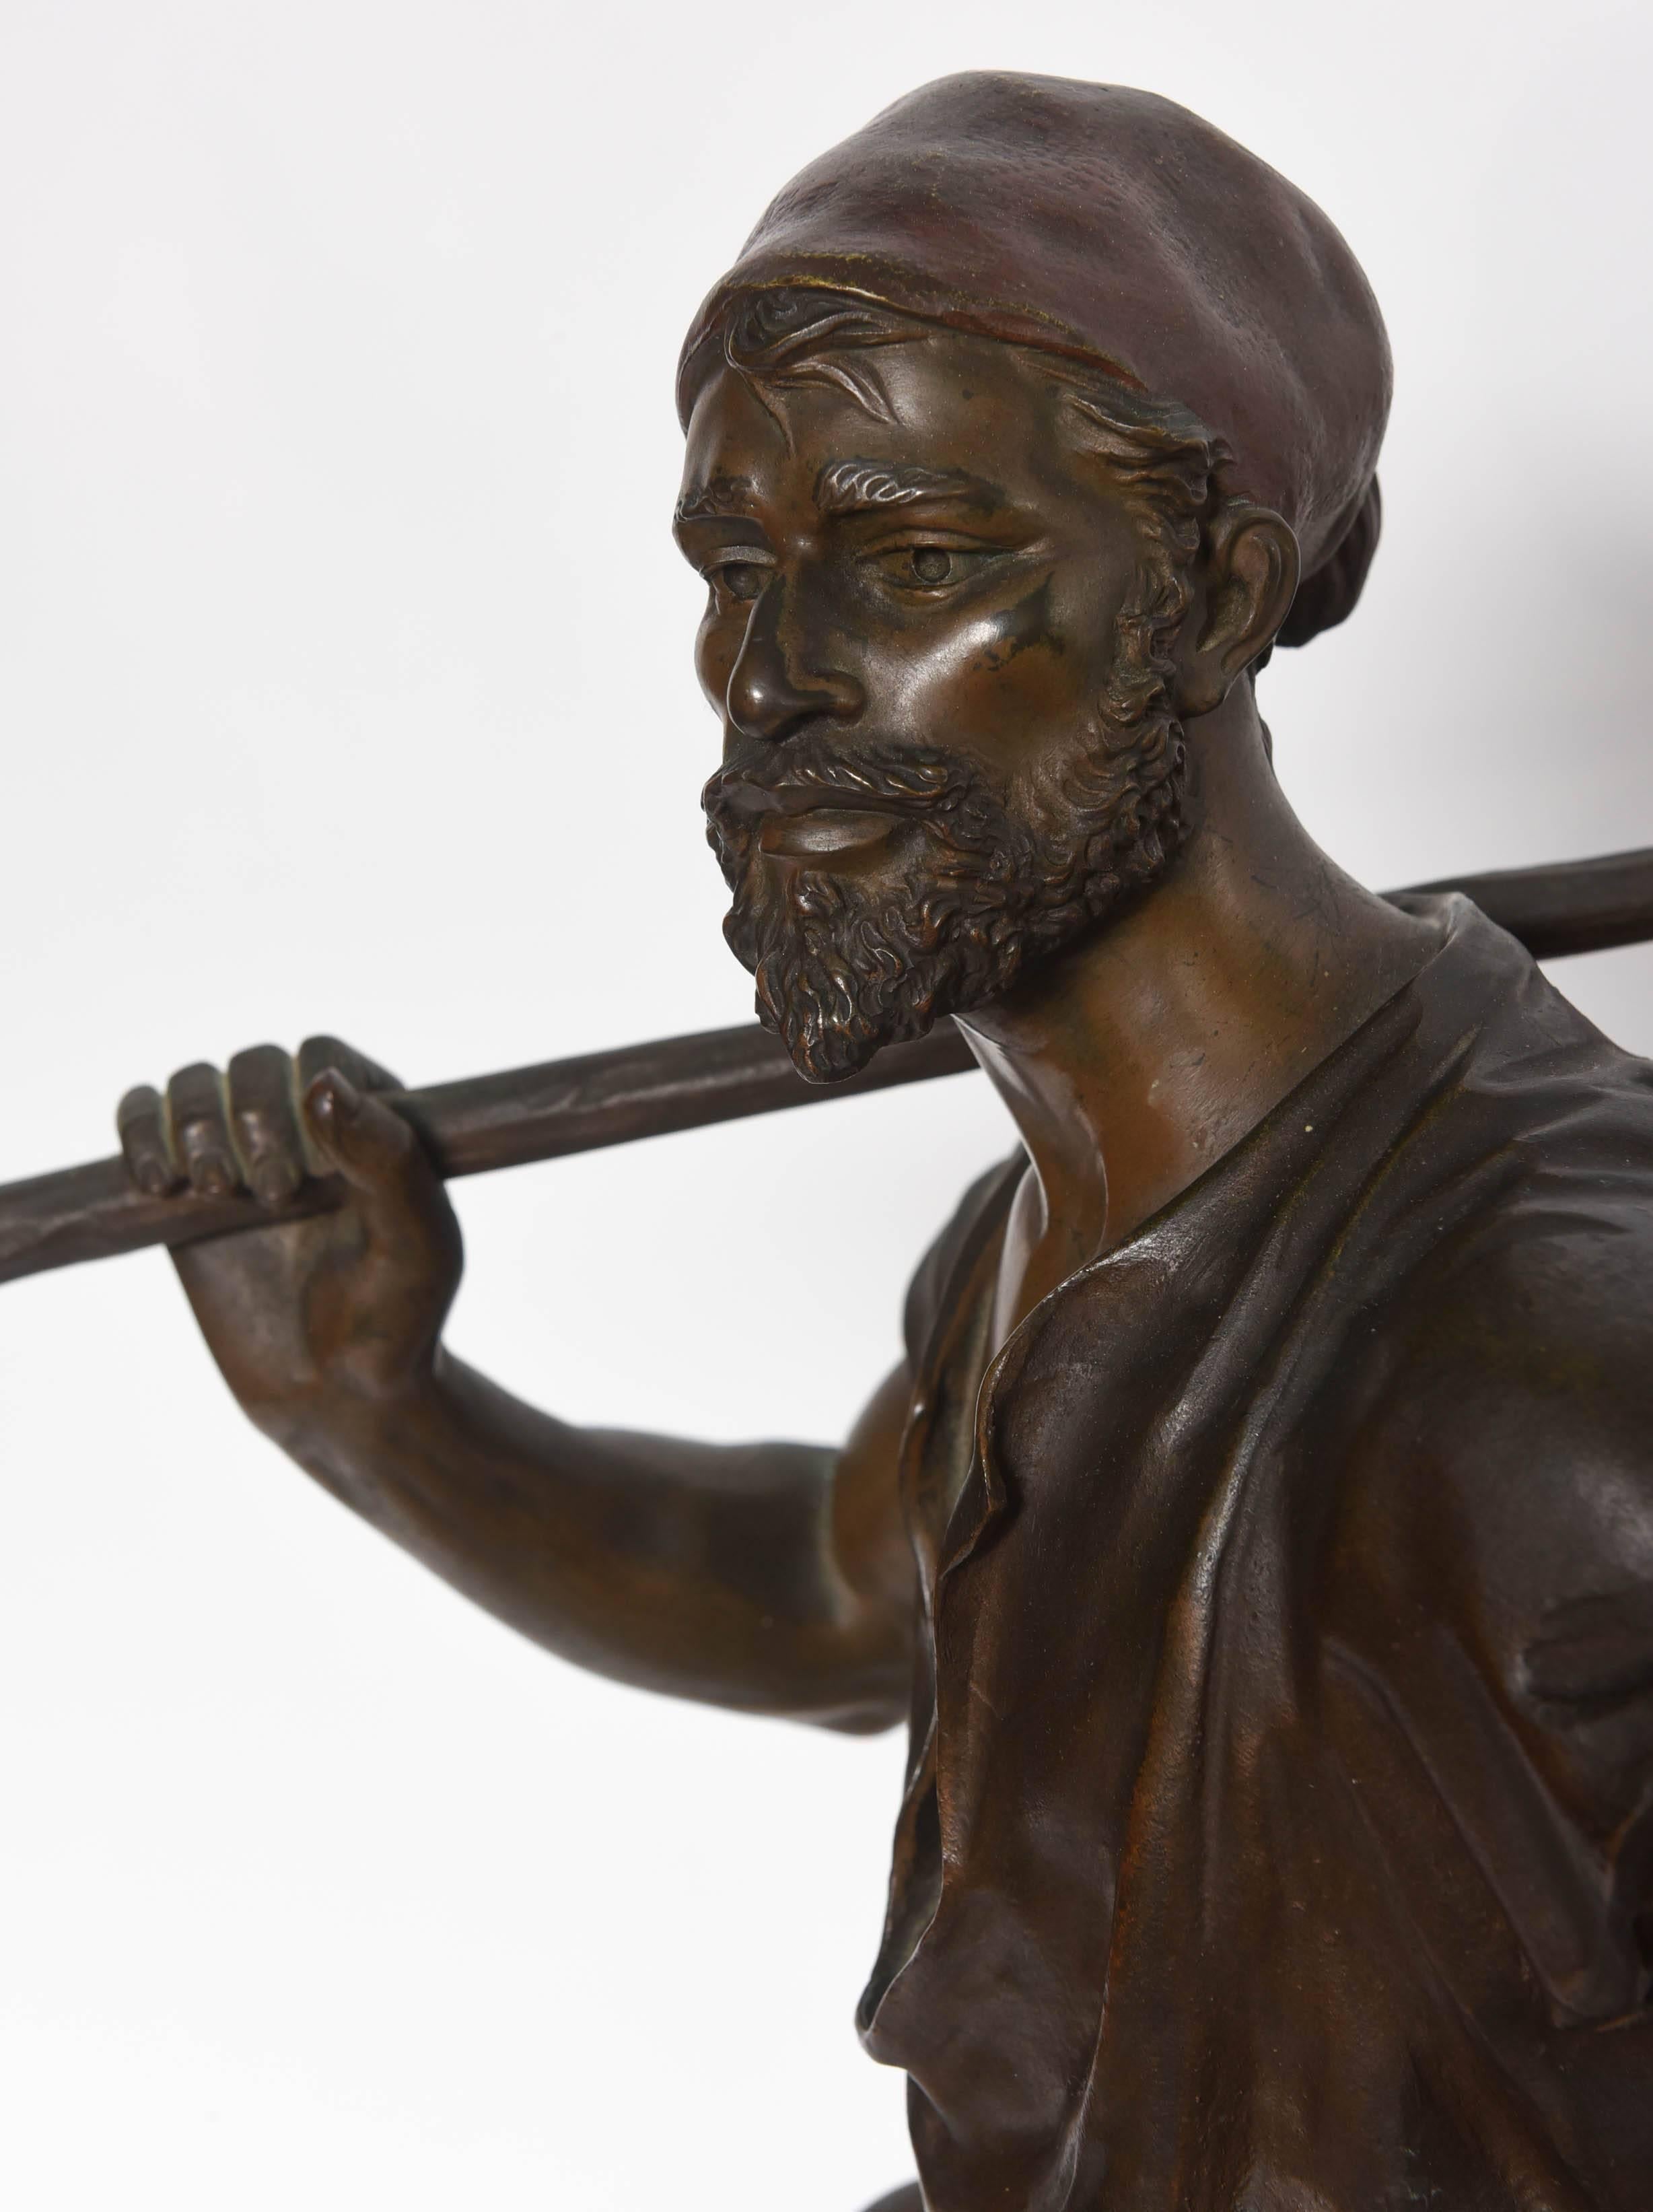 Superbly fashioned figure of a water carrier by the famed French sculptor.
Cast in the Gautier foundry.